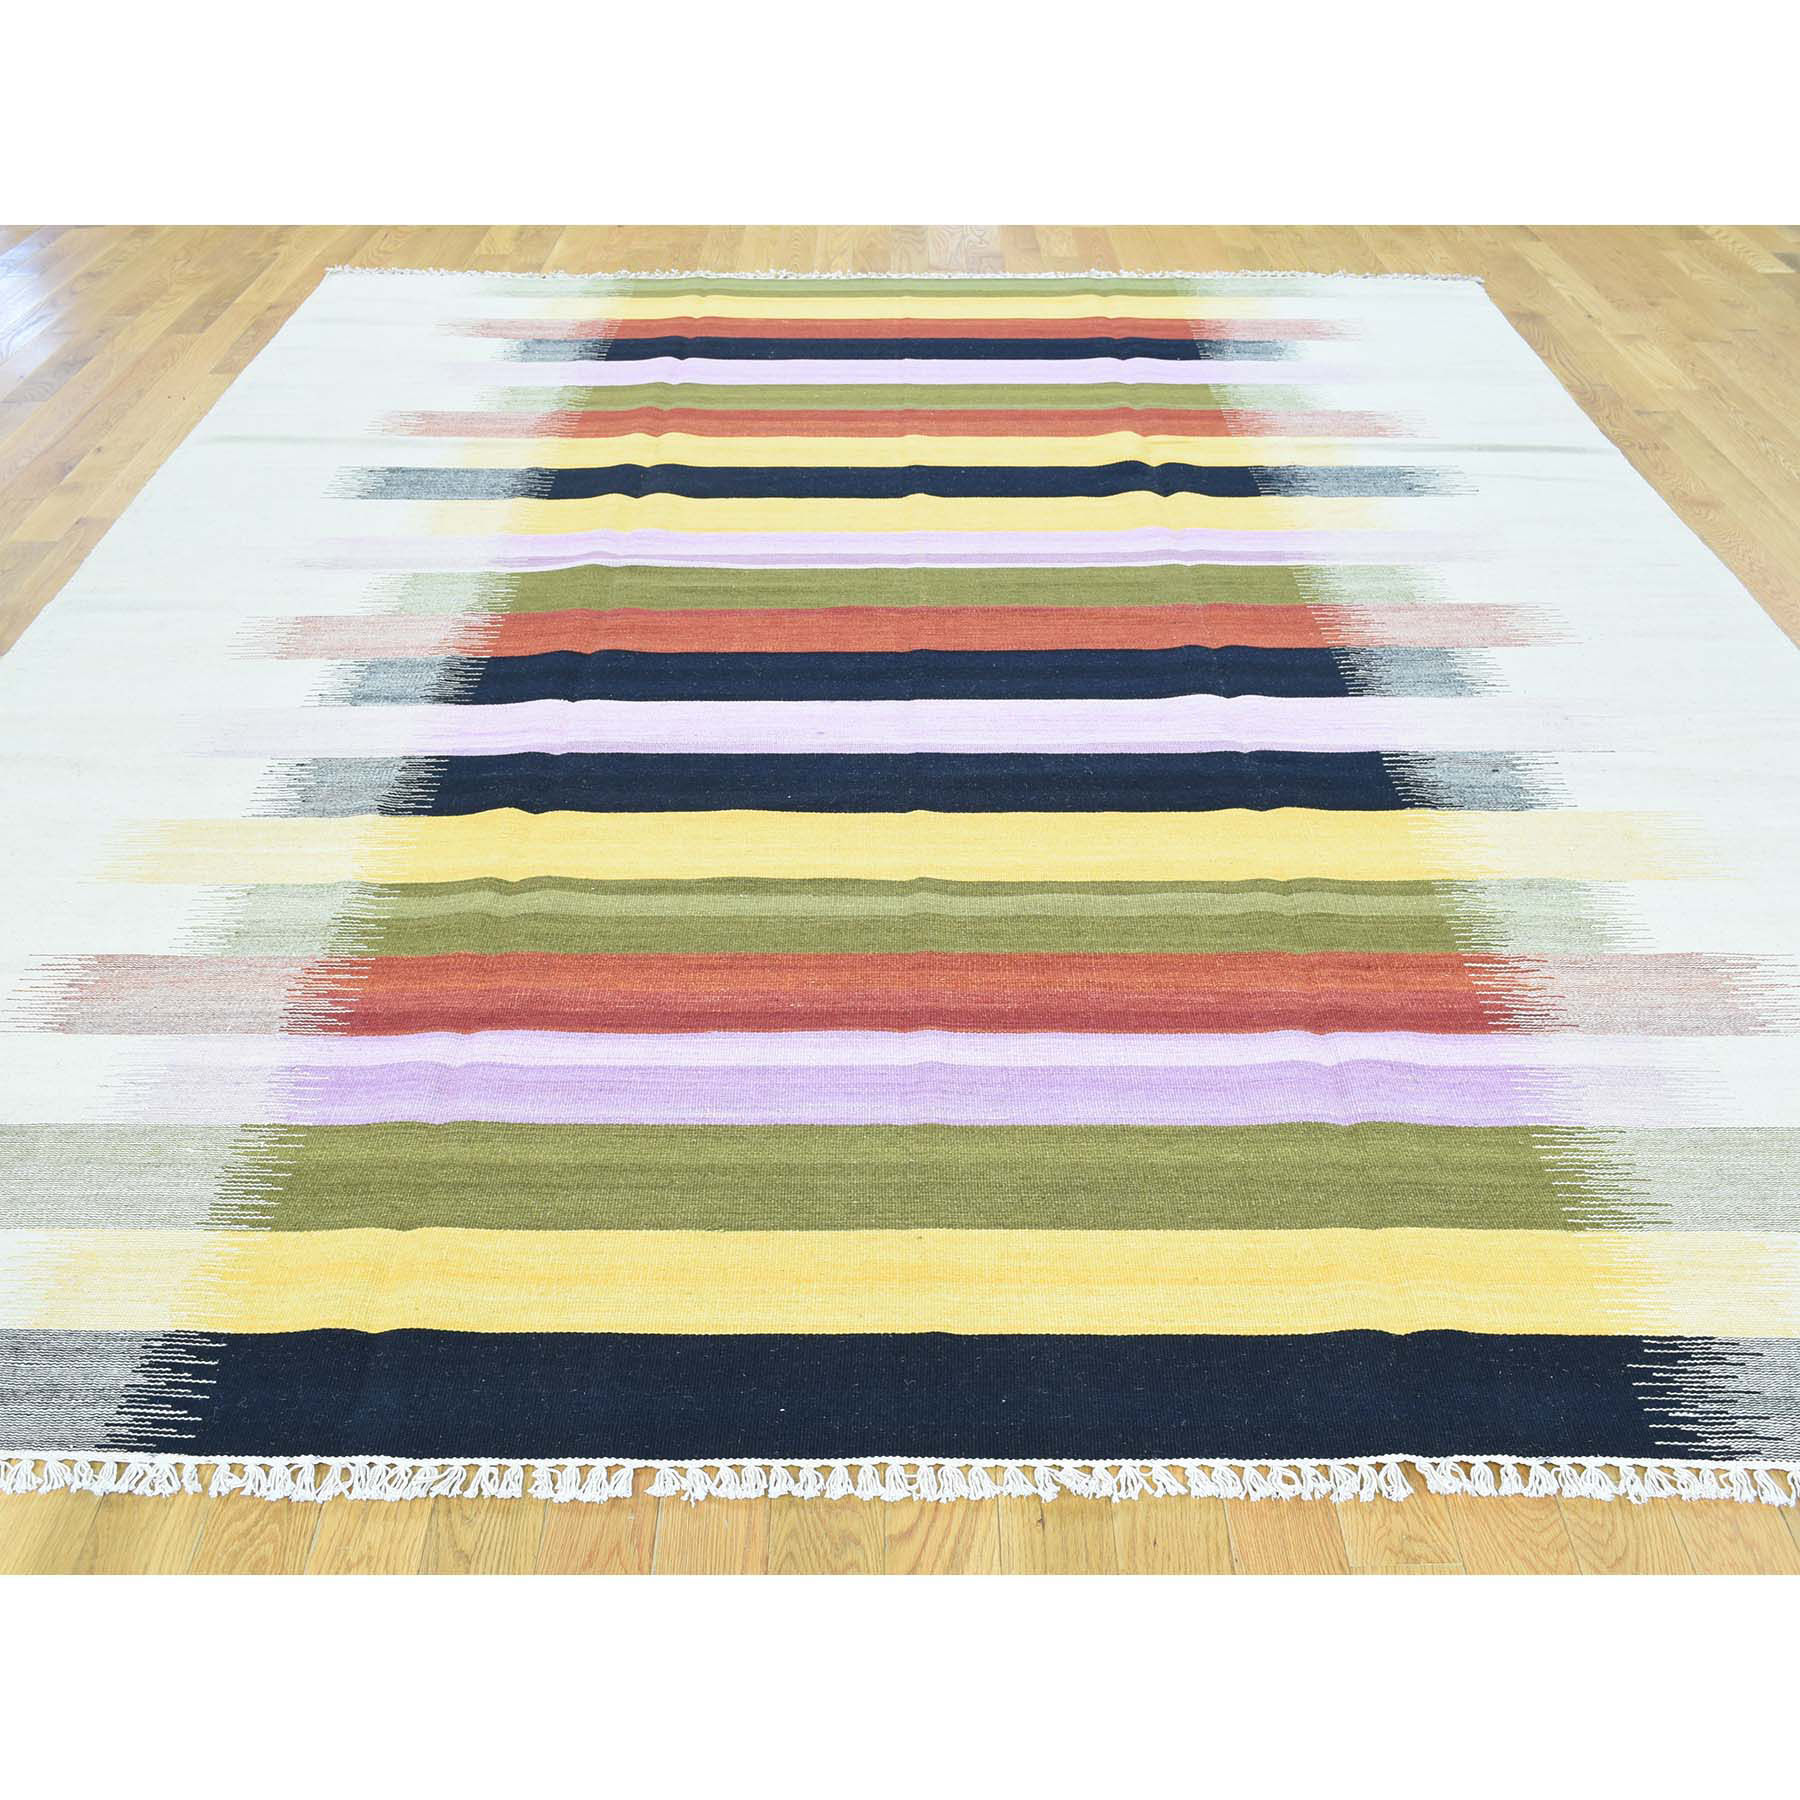 8-x10-2  Hand-Woven Pure Wool Flat Weave Colorful Dazzling Kilim Rug 